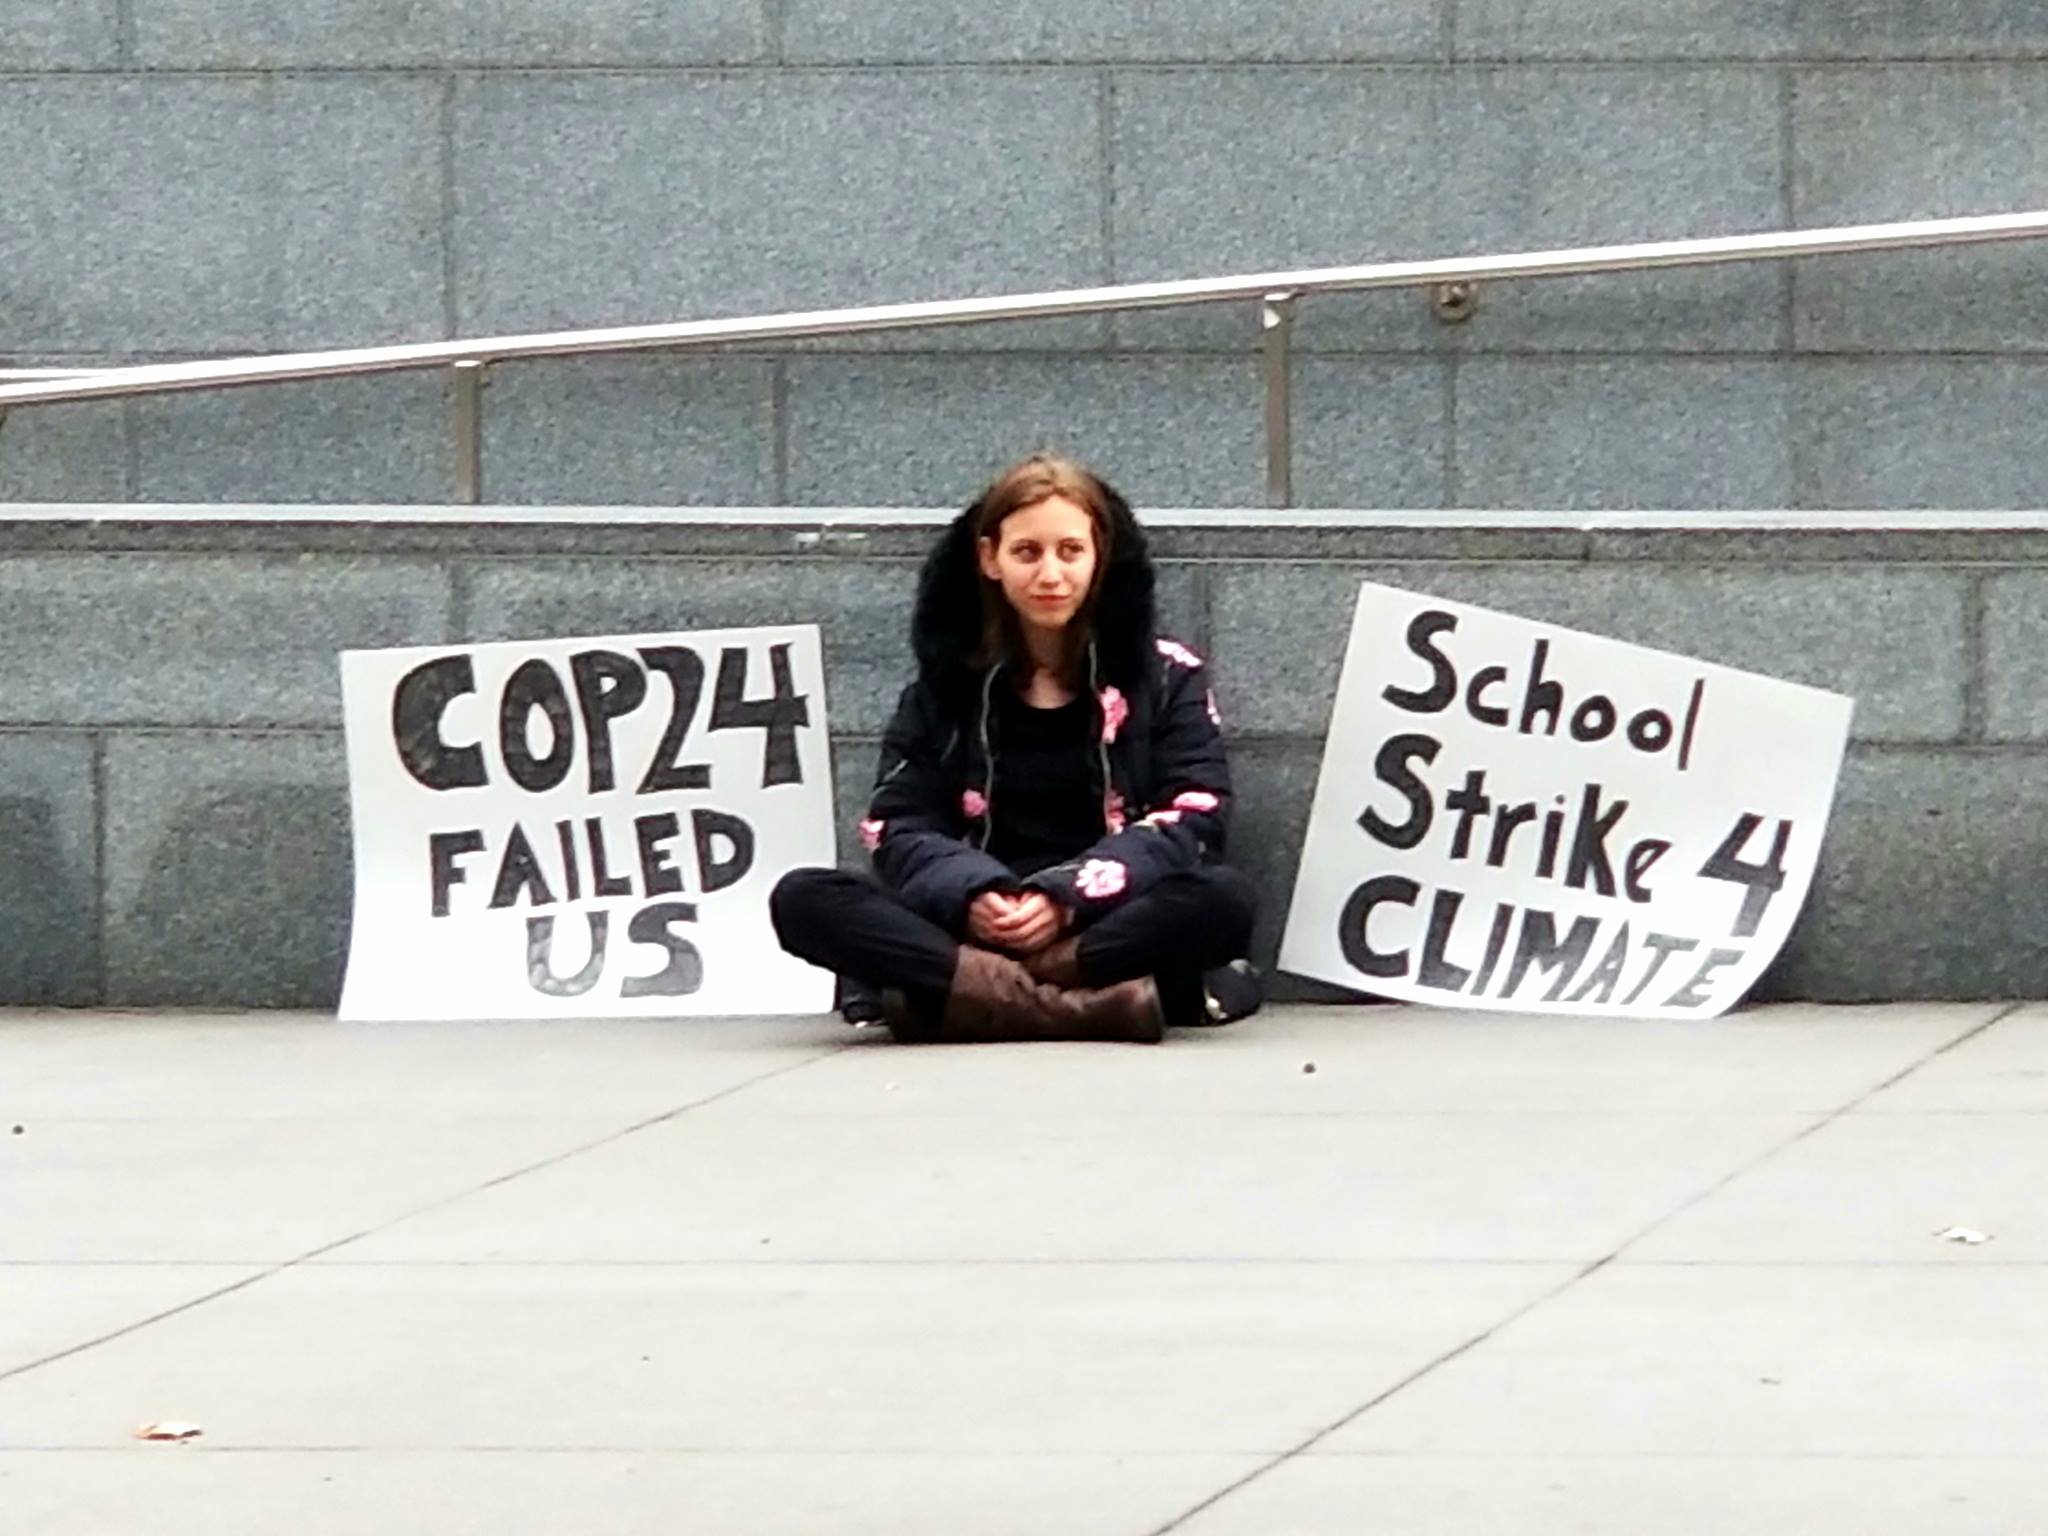 #FridaysForTheFuture – A Kids Walkout Every Friday for the Climate